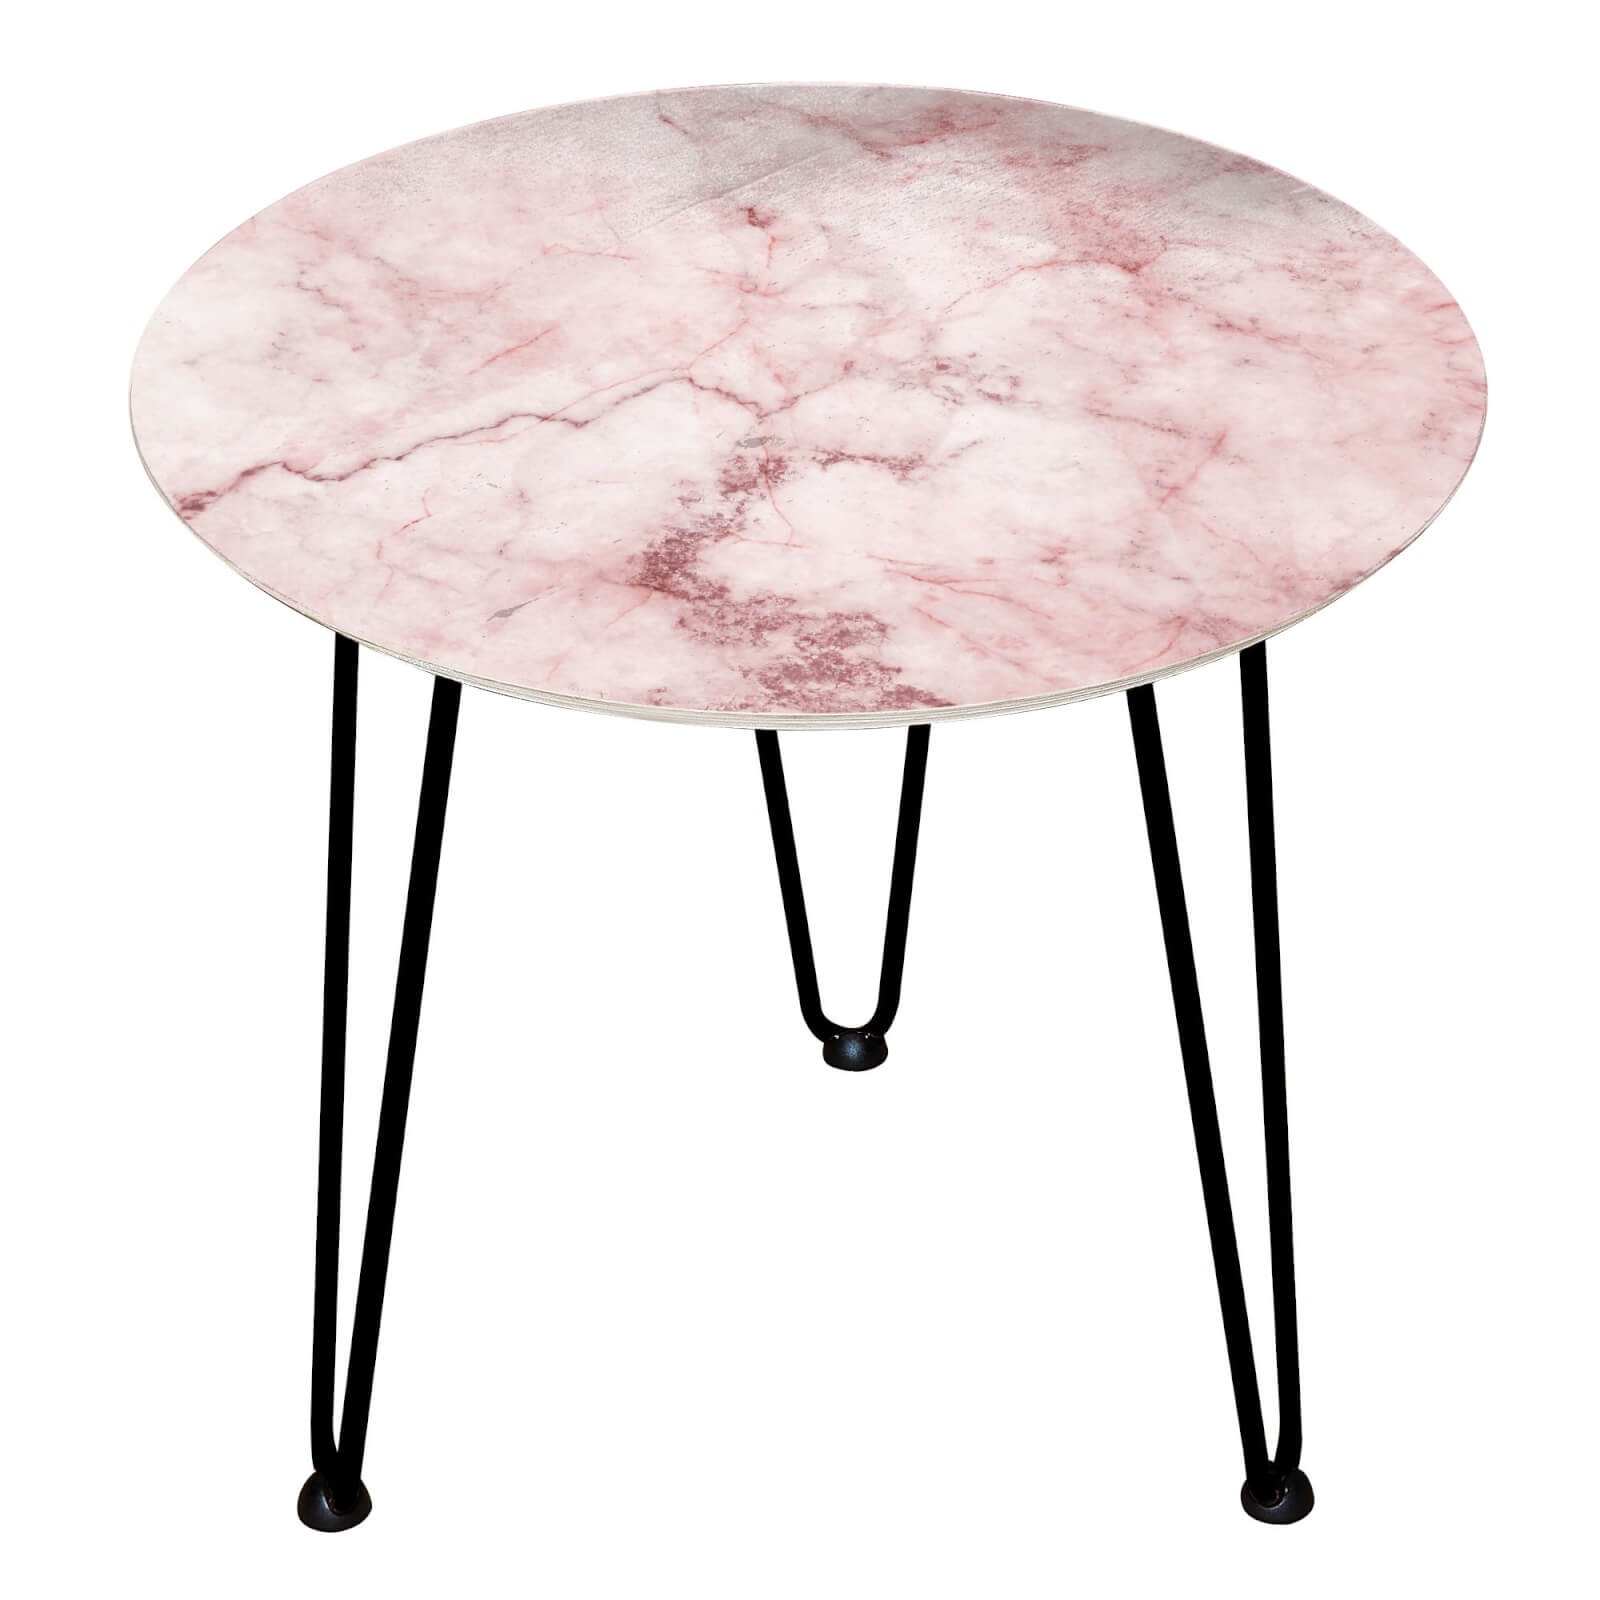 Decorsome - Pink Marble Wooden Side Table - Black